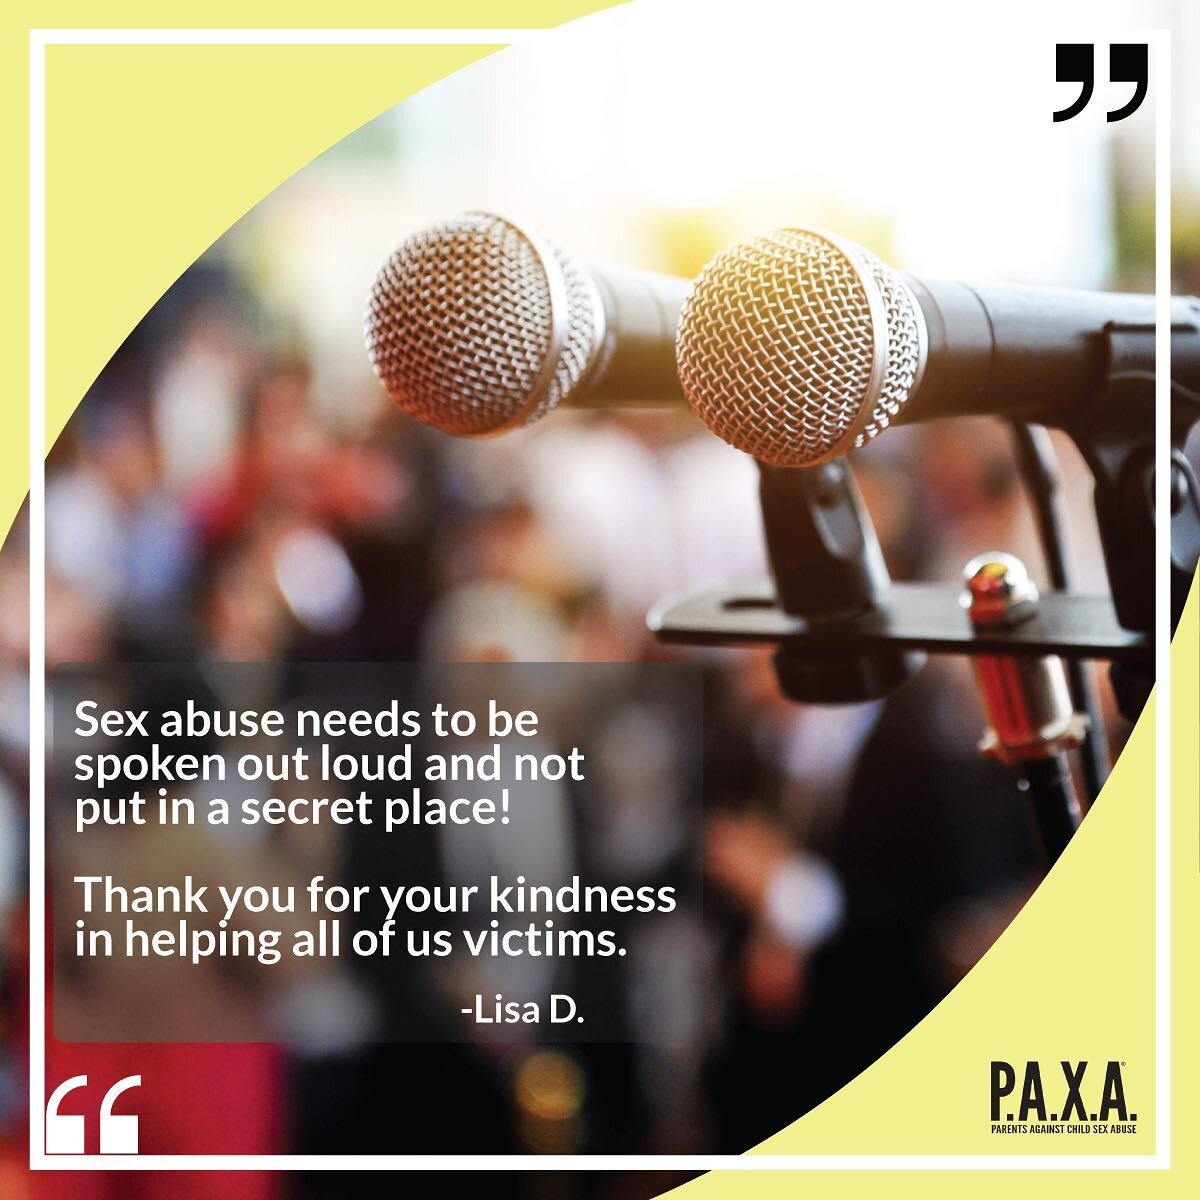 &quot;Sex abuse needs to be spoken out loud and not put in a secret place! Thank you for your kindness in helping all of us victims.&quot;
&mdash; Lisa D.

Thank you, Lisa for your kind words. #PAXA #survivors